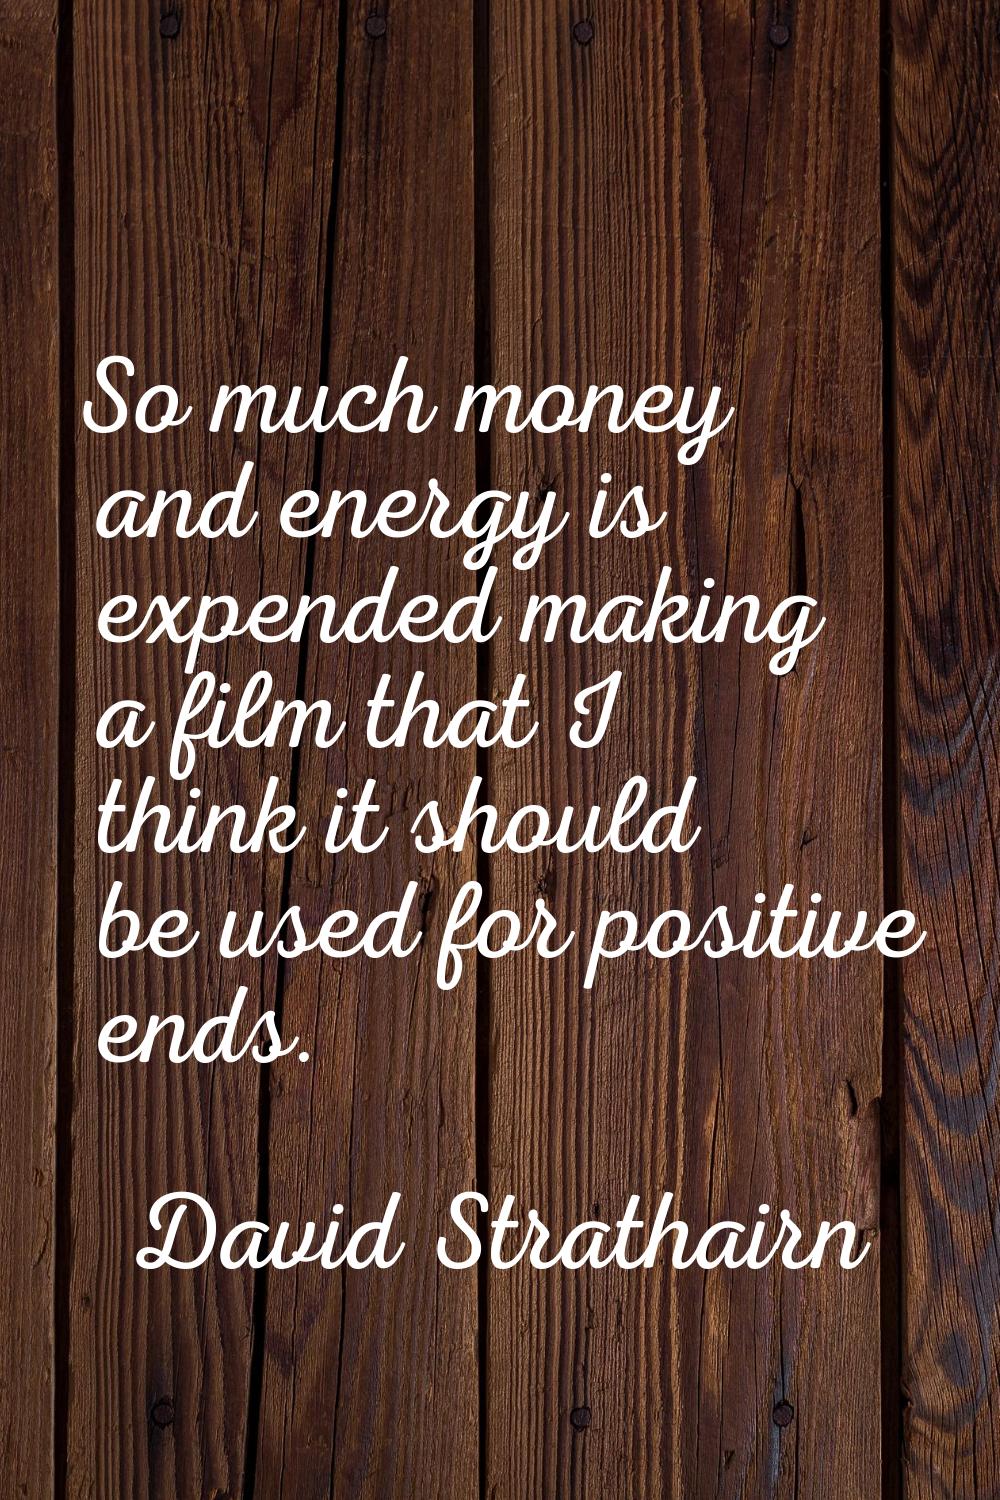 So much money and energy is expended making a film that I think it should be used for positive ends